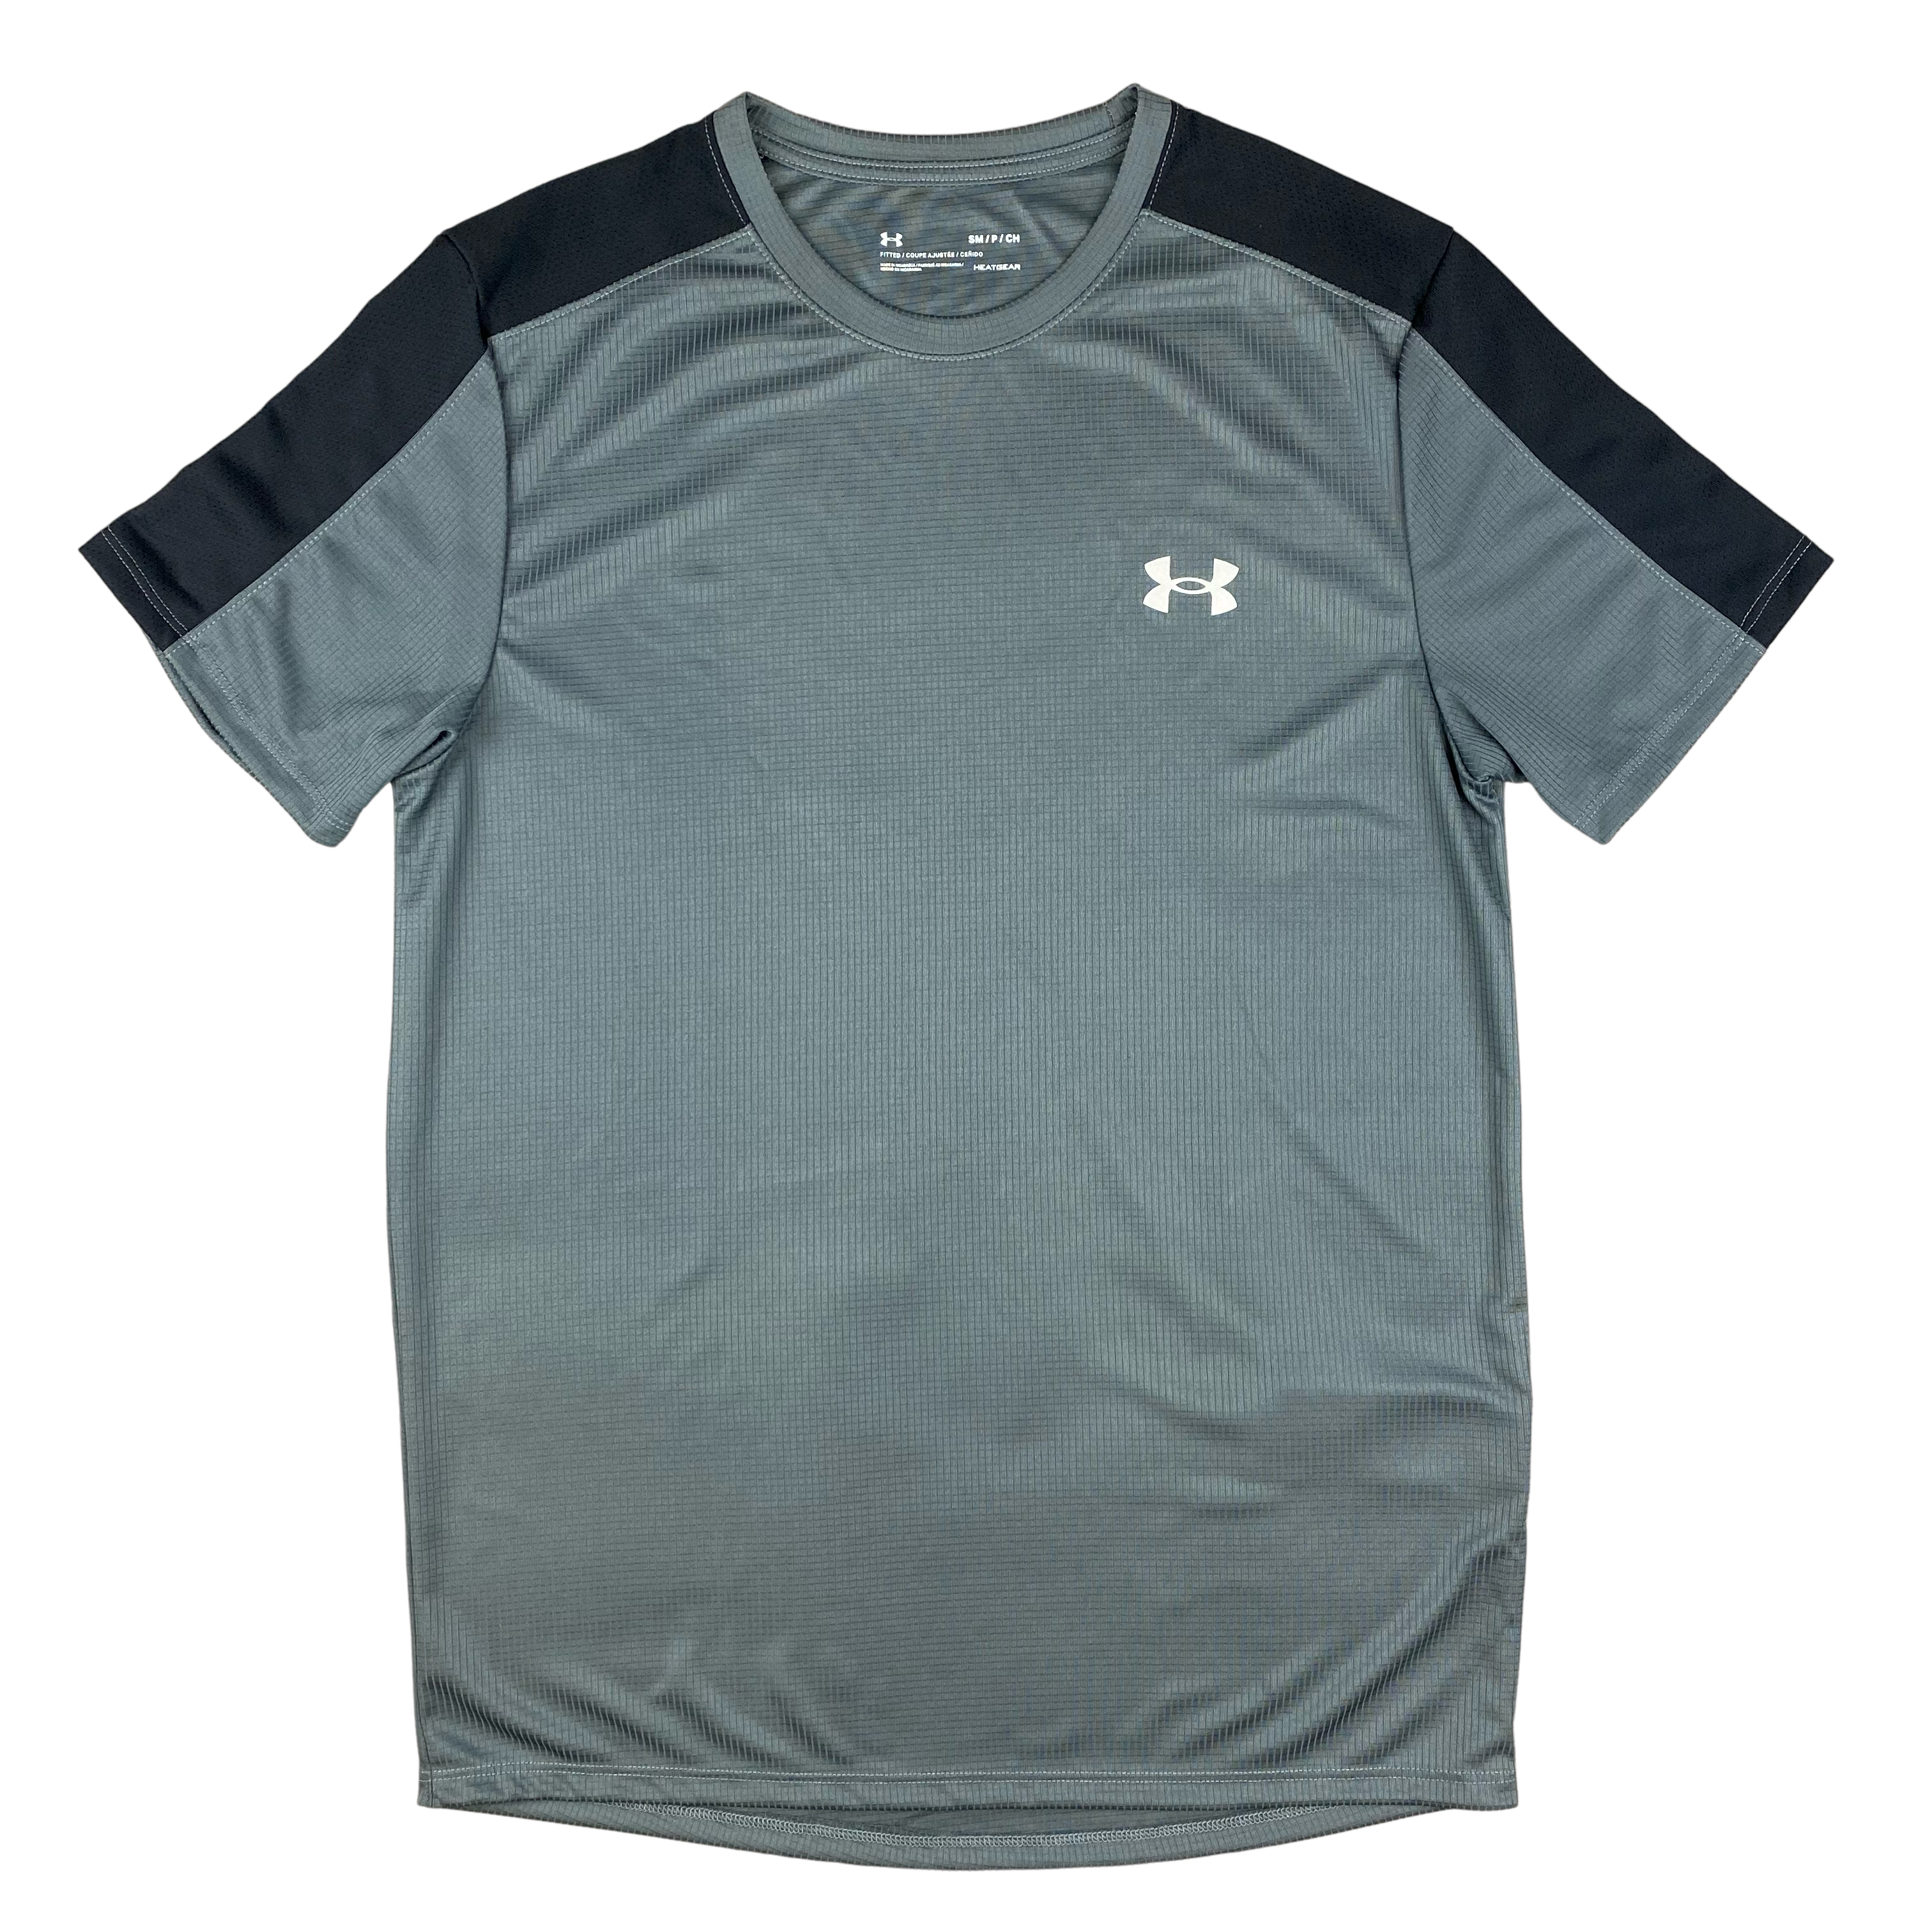 UNDER ARMOUR PITCH T-SHIRT - GREY